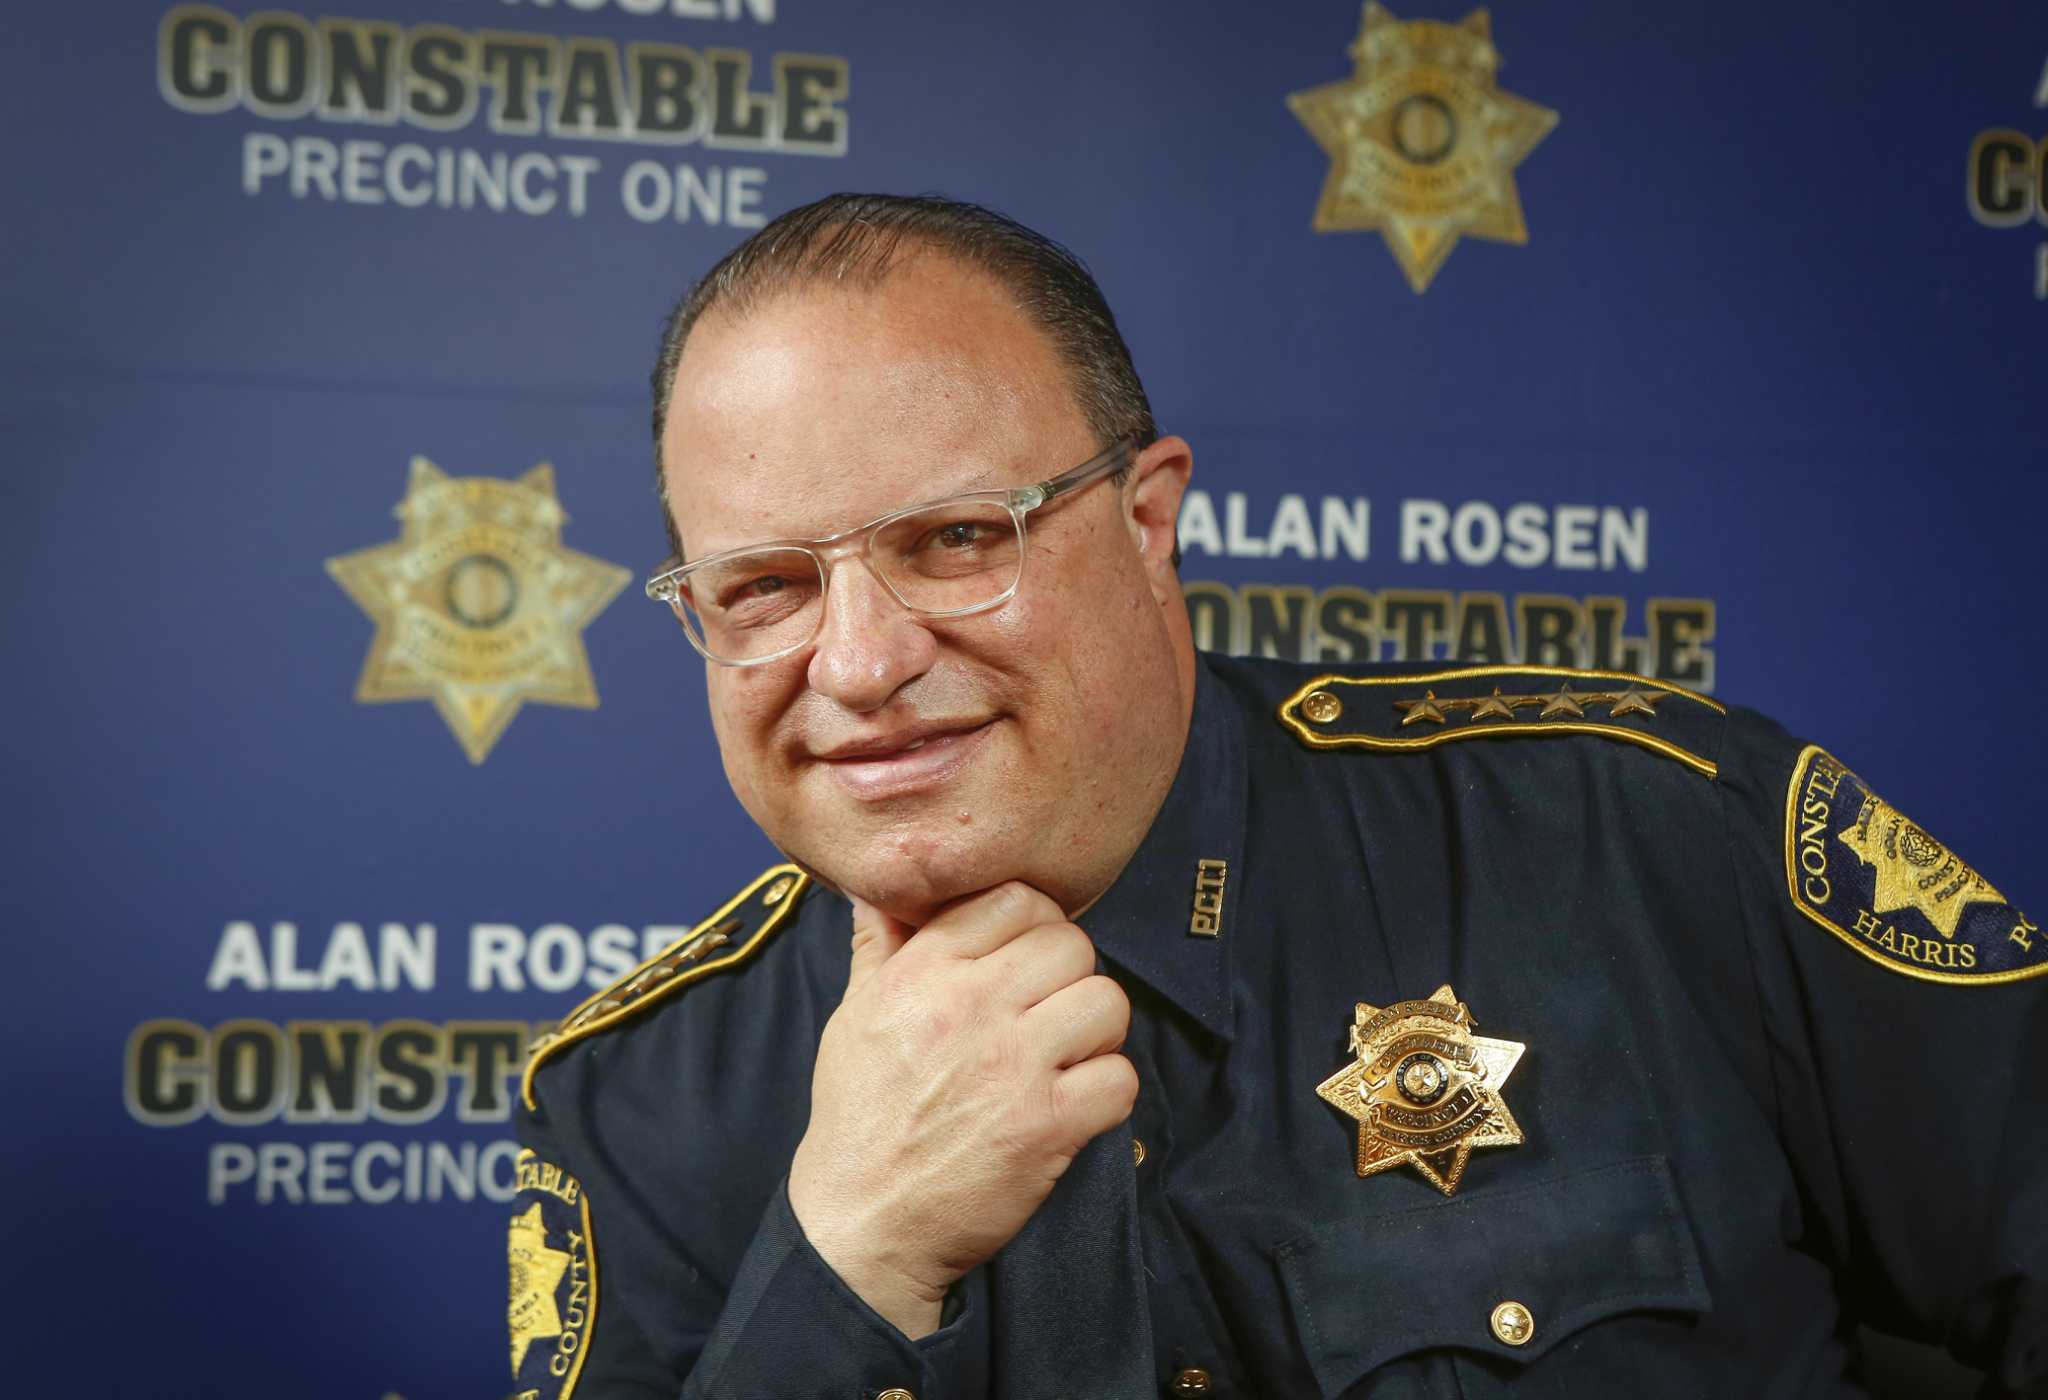 Constable Alan Rosen cant be sued over Harris County deputies sex abuse claims, judge rules